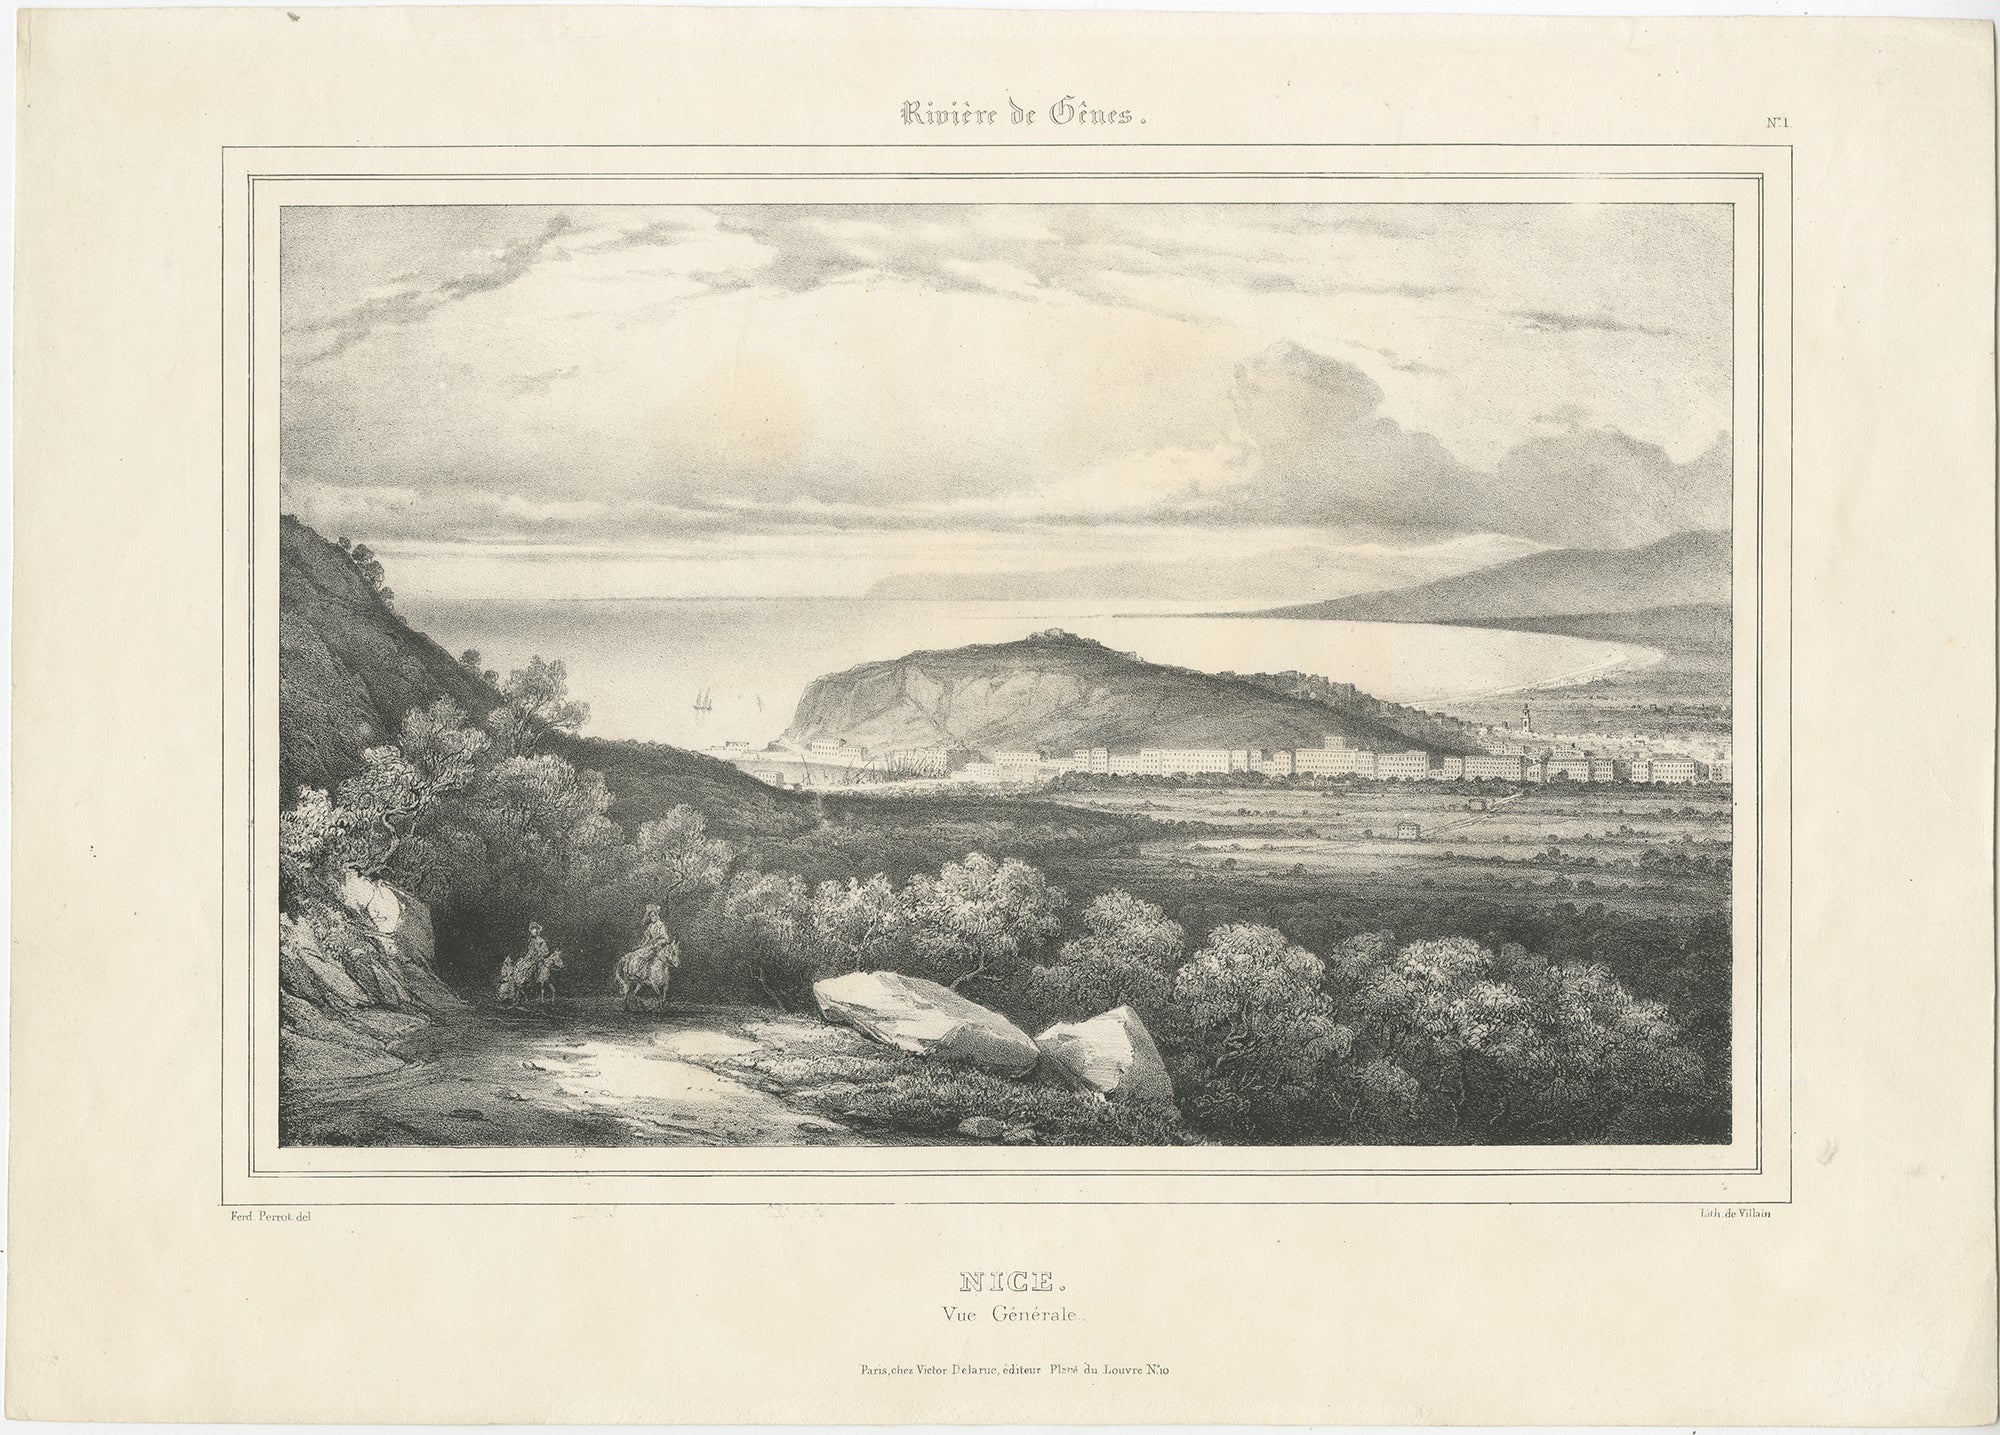 Antique print titled 'Nice Vue Générale'. View of the city of Nice, France. Source unknown, to be determined.

Artists and Engravers: Lithographed by Villain. Published by Victor Delarue.

Condition: Good, general age-related toning. Minor wear,